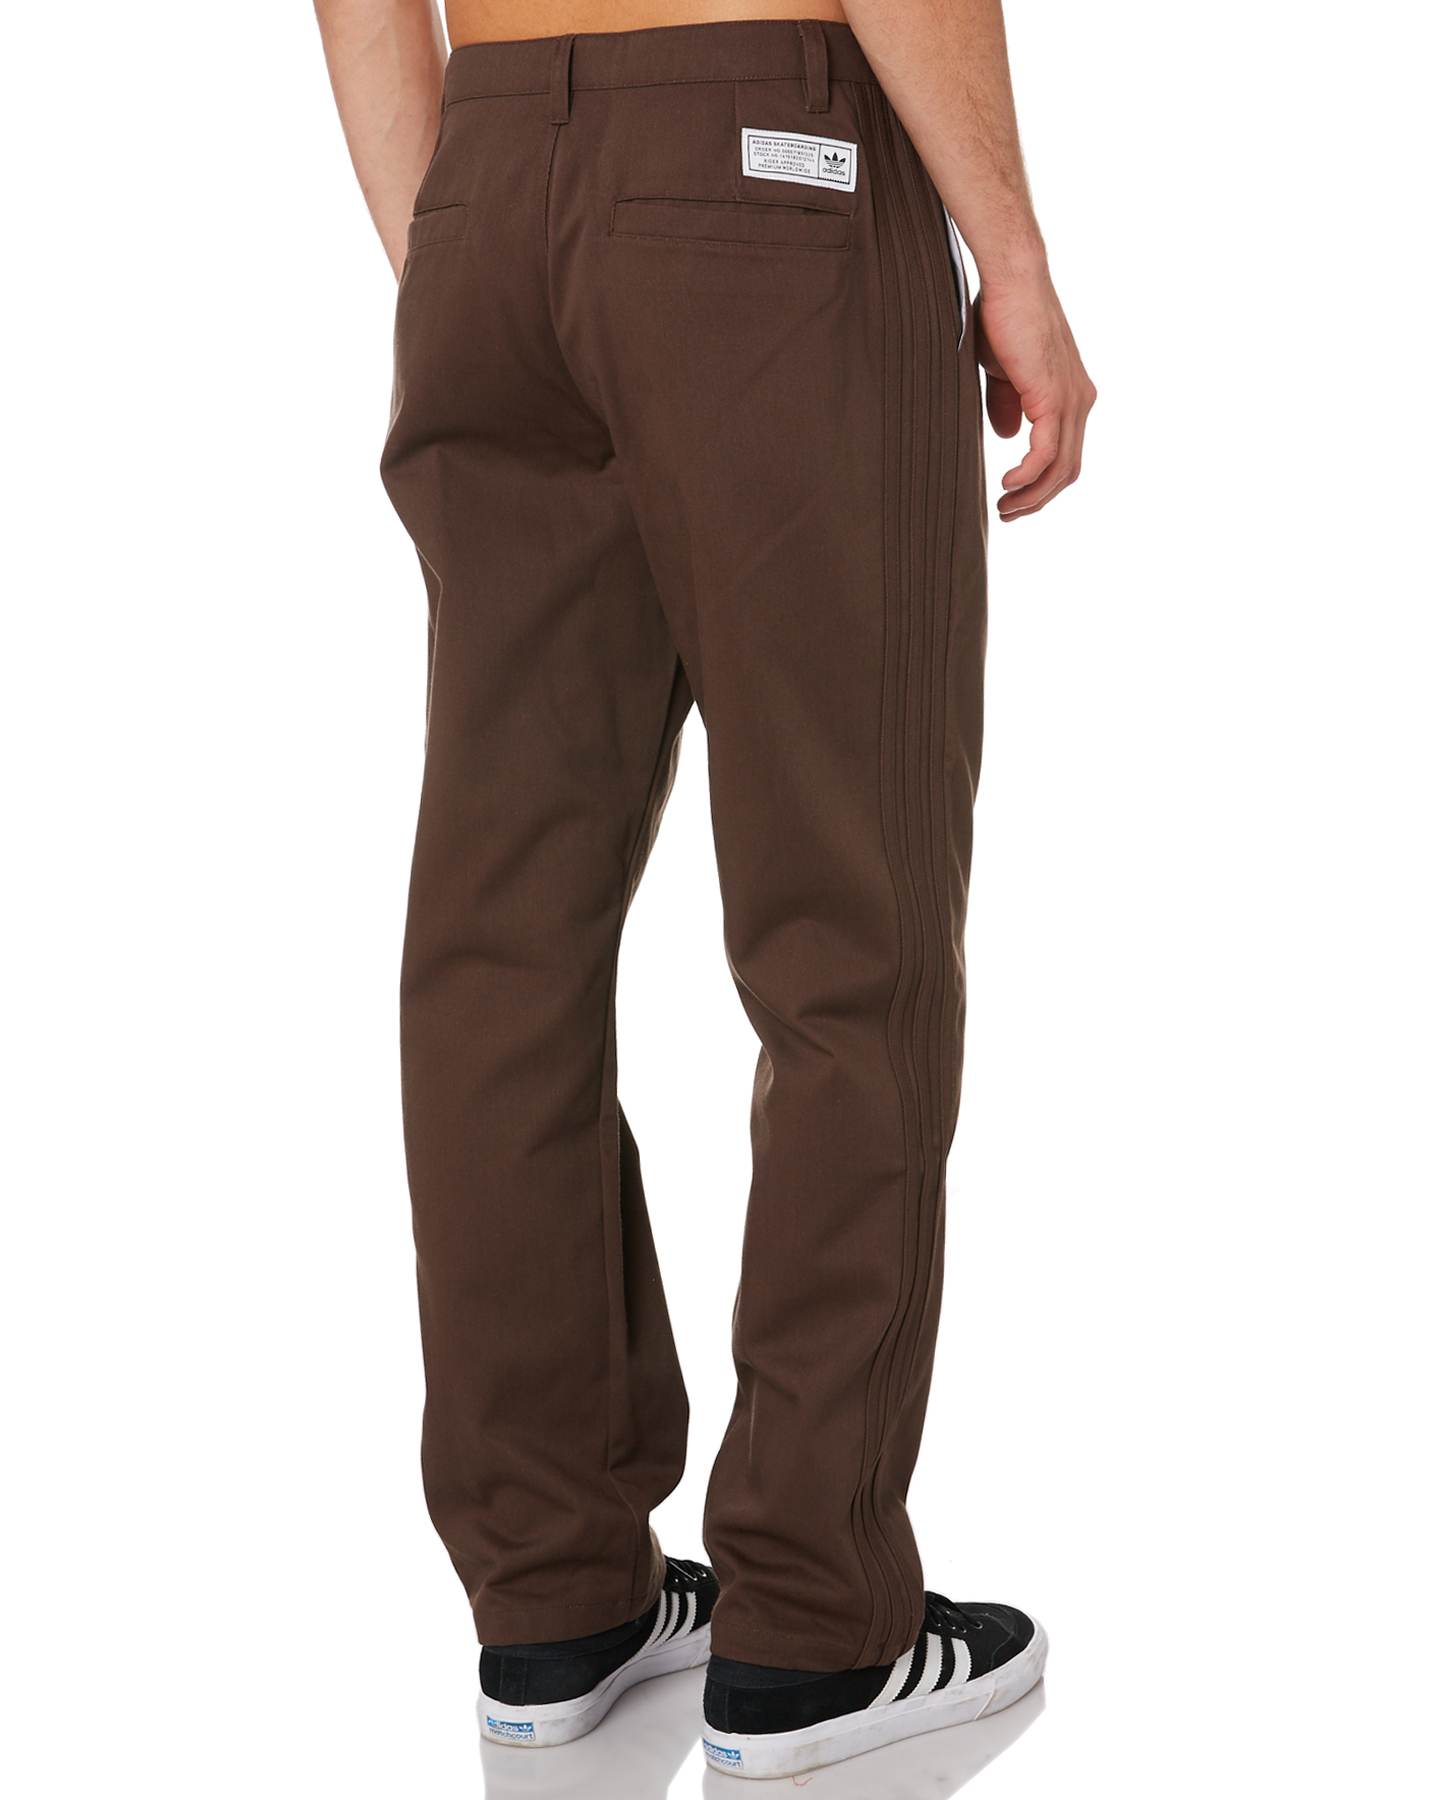 Adidas Striped Chino Mens Pant - Brown | SurfStitch